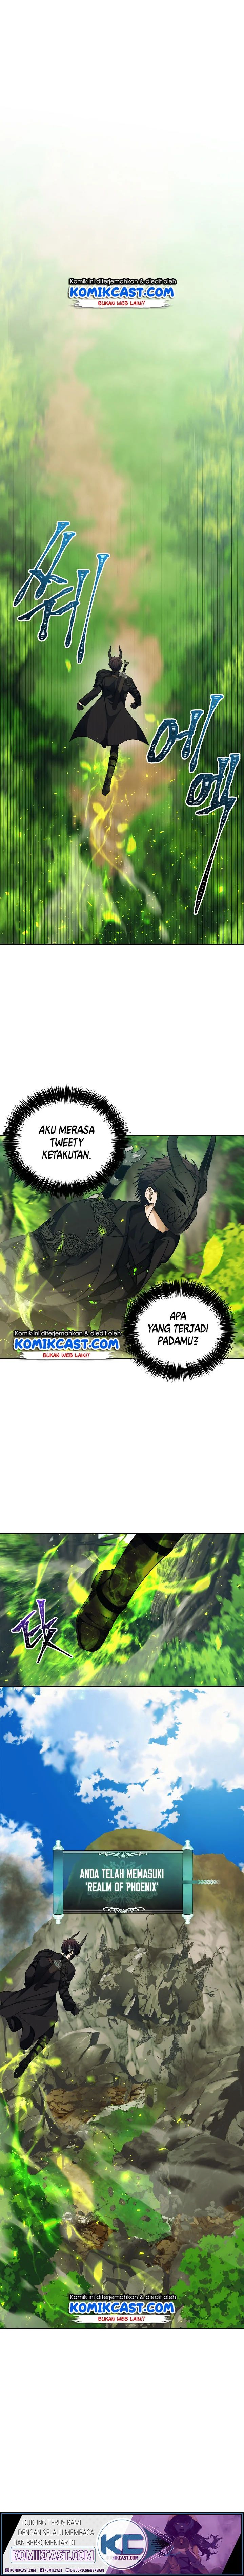 Ranker Who Lives A Second Time Chapter 72